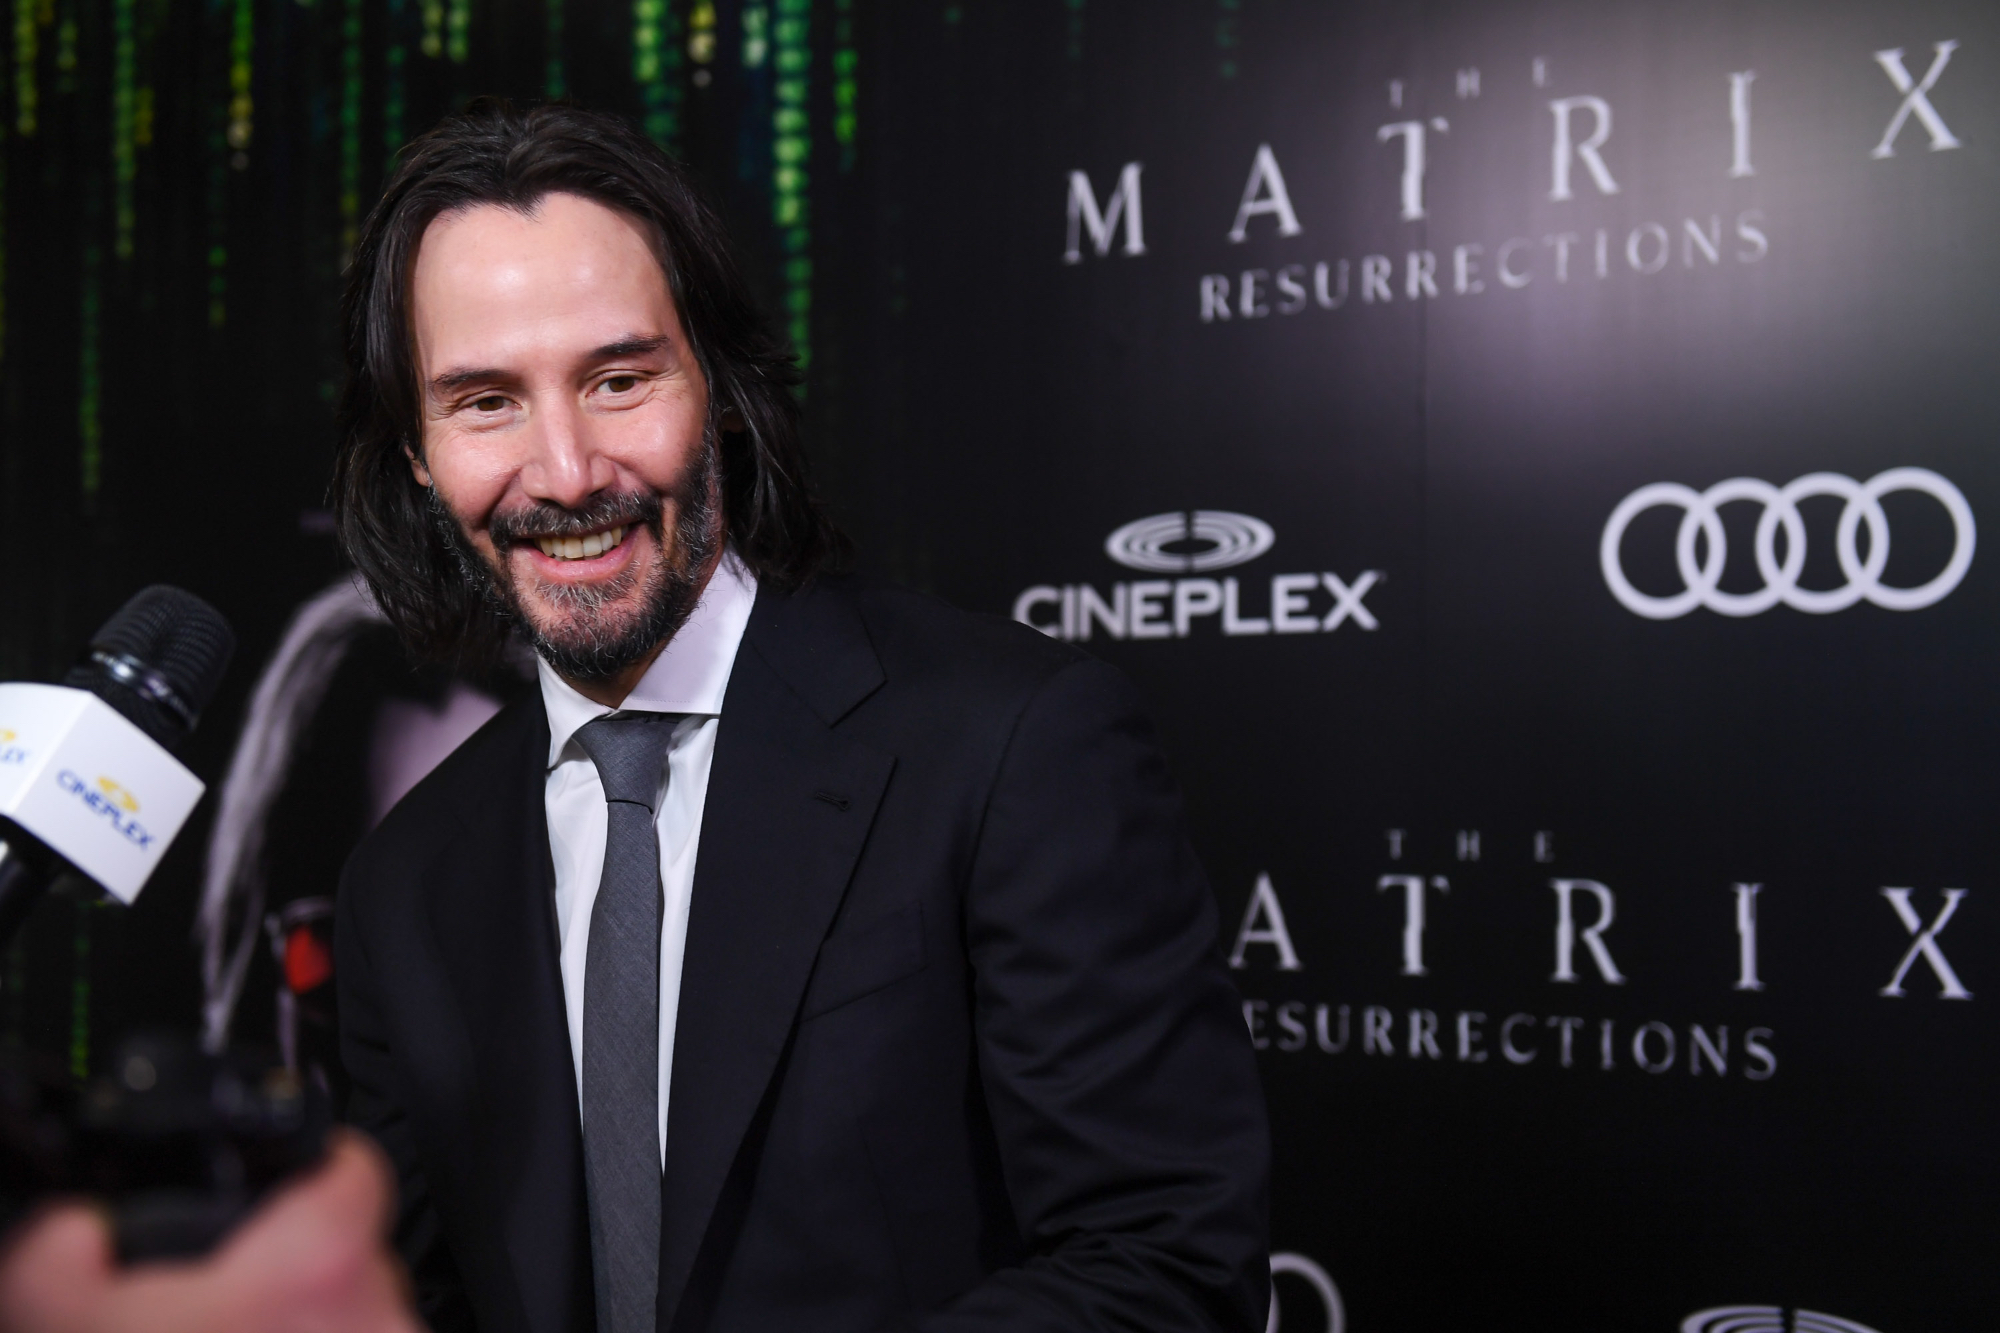 'The Matrix Resurrections' Keanu Reeves smiling in front of a step and repeat